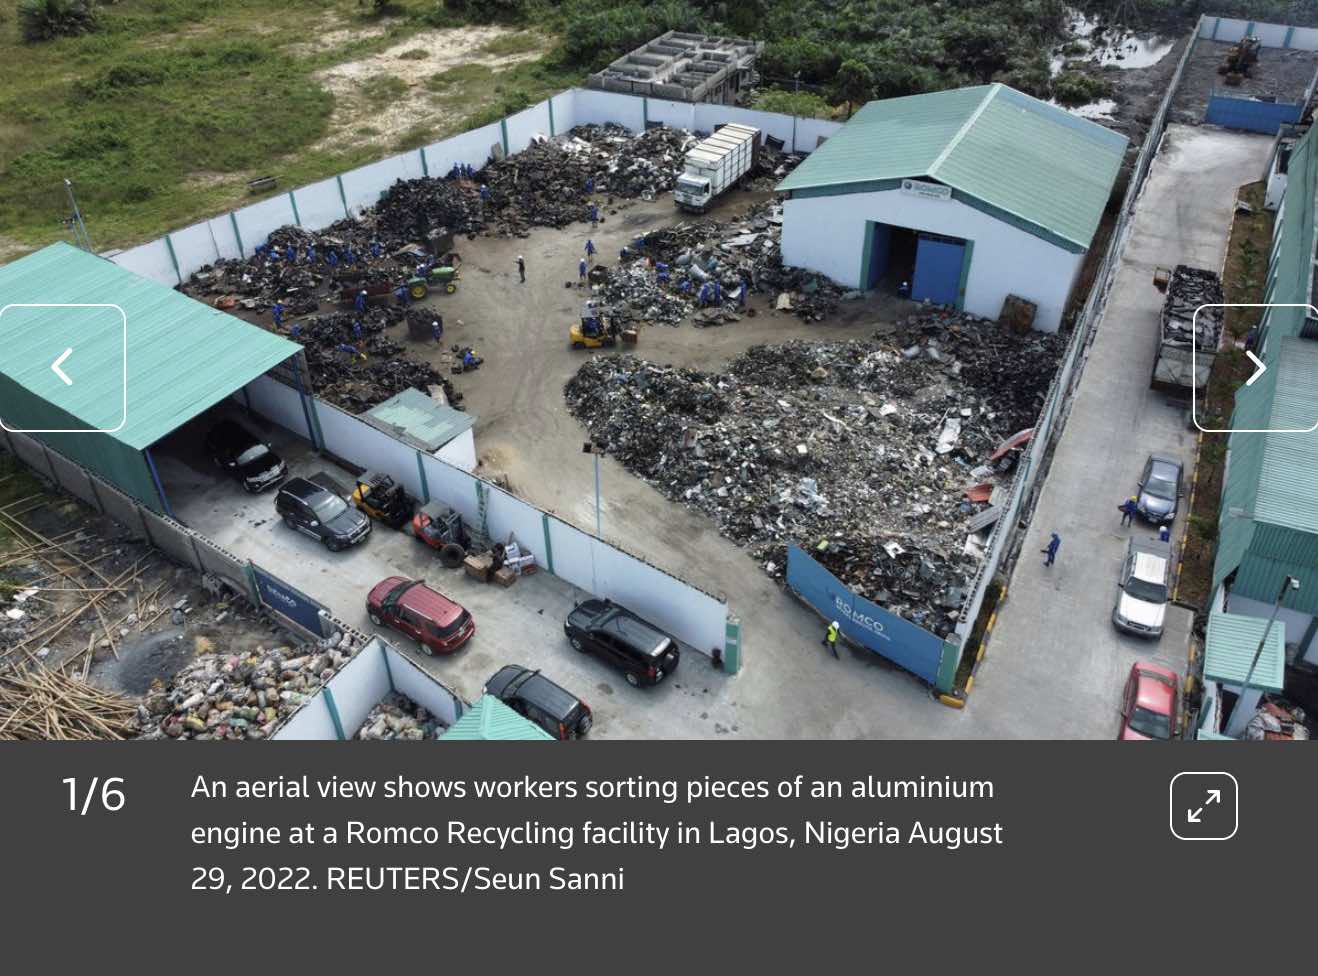 Reuters — Scrap metals recycler Romco eyes green hydrogen to power furnaces in Africa